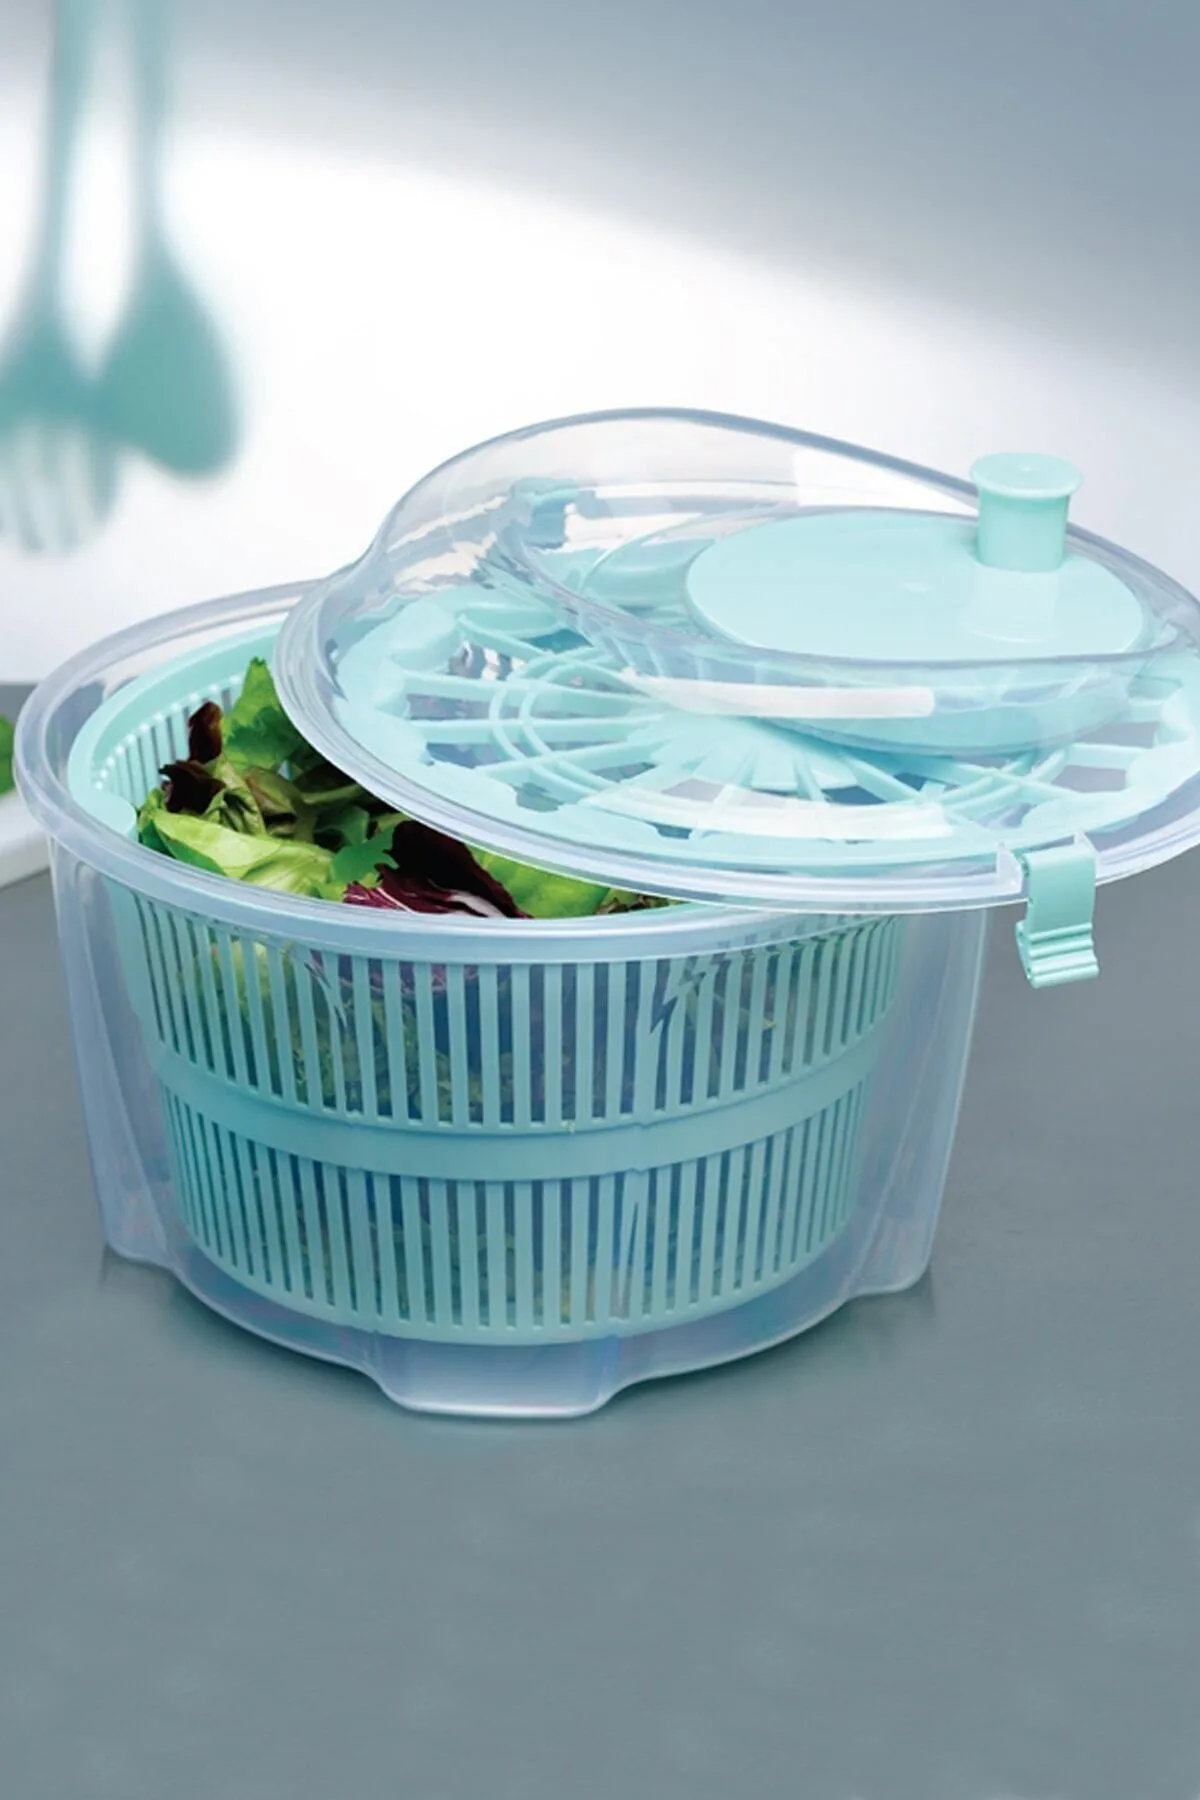 

Salad Dryer Storage Container With Strainer Centrifuge Water Separation Boxed Product BPA Free Quality Plastic